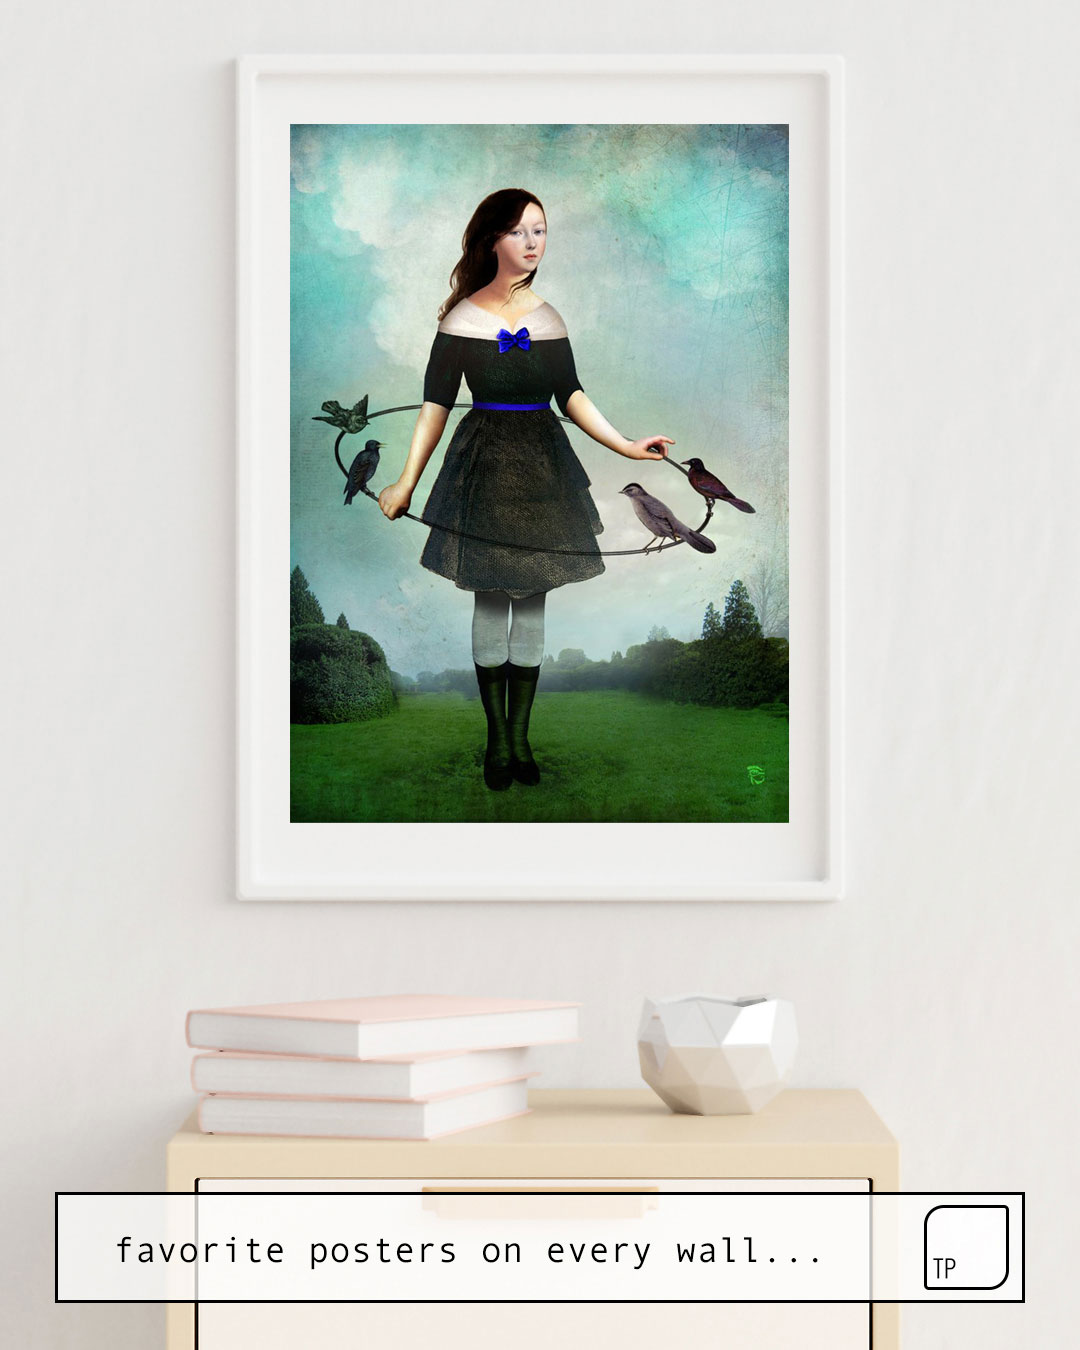 The photo shows an example of furnishing with the motif THE GARDEN GAME by Christian Schloe as mural